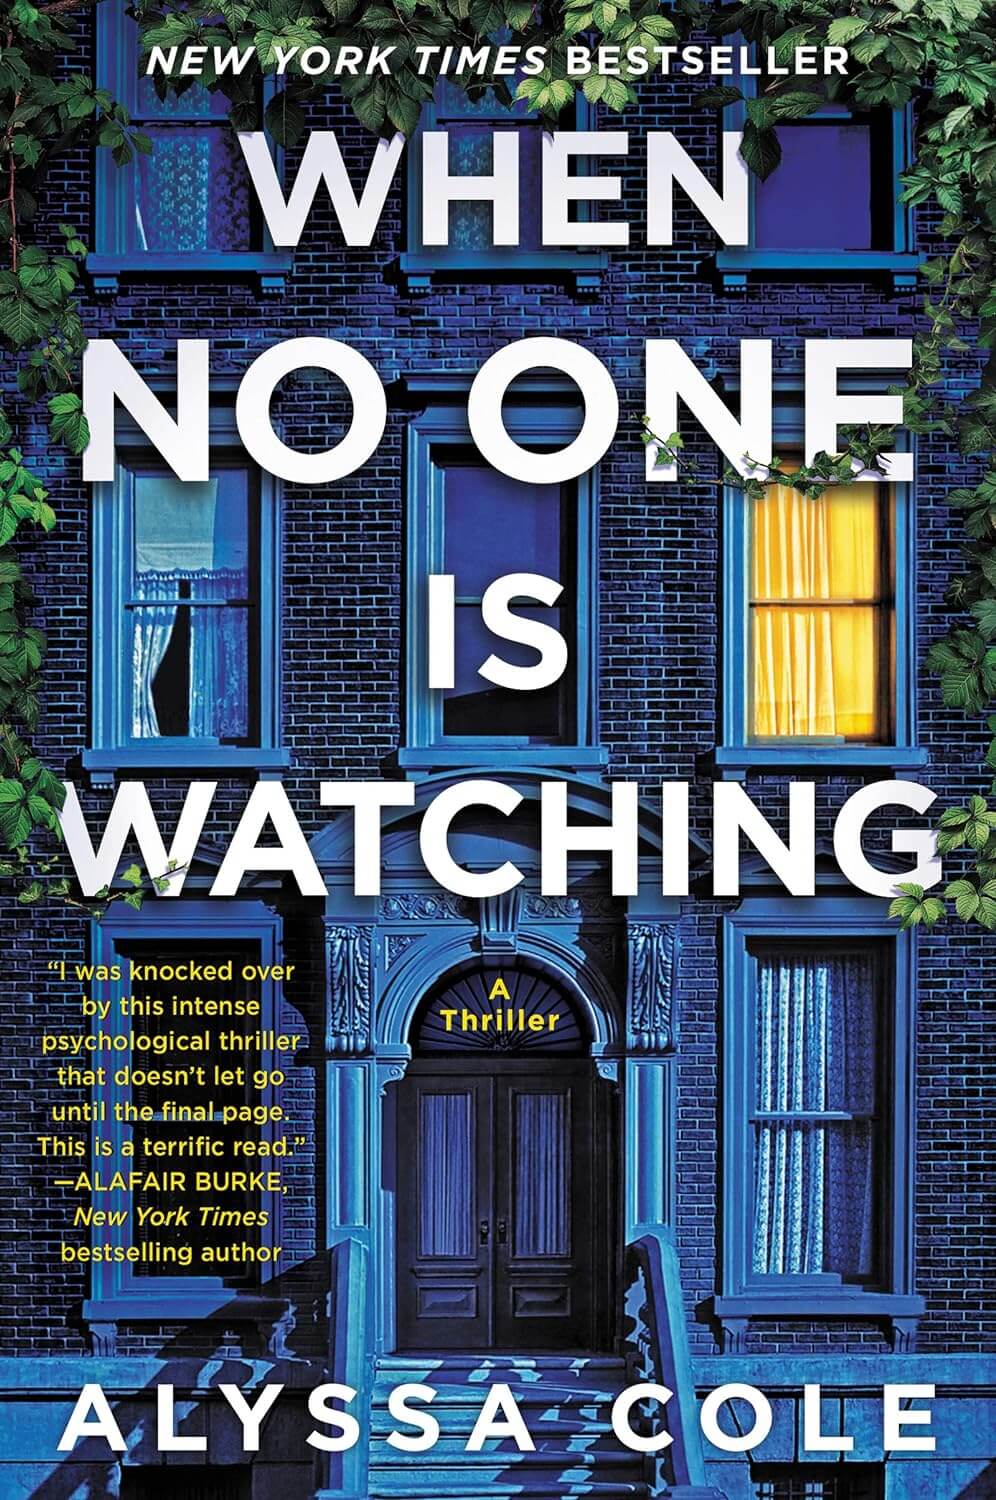 I'm reading "When No One Is Watching"